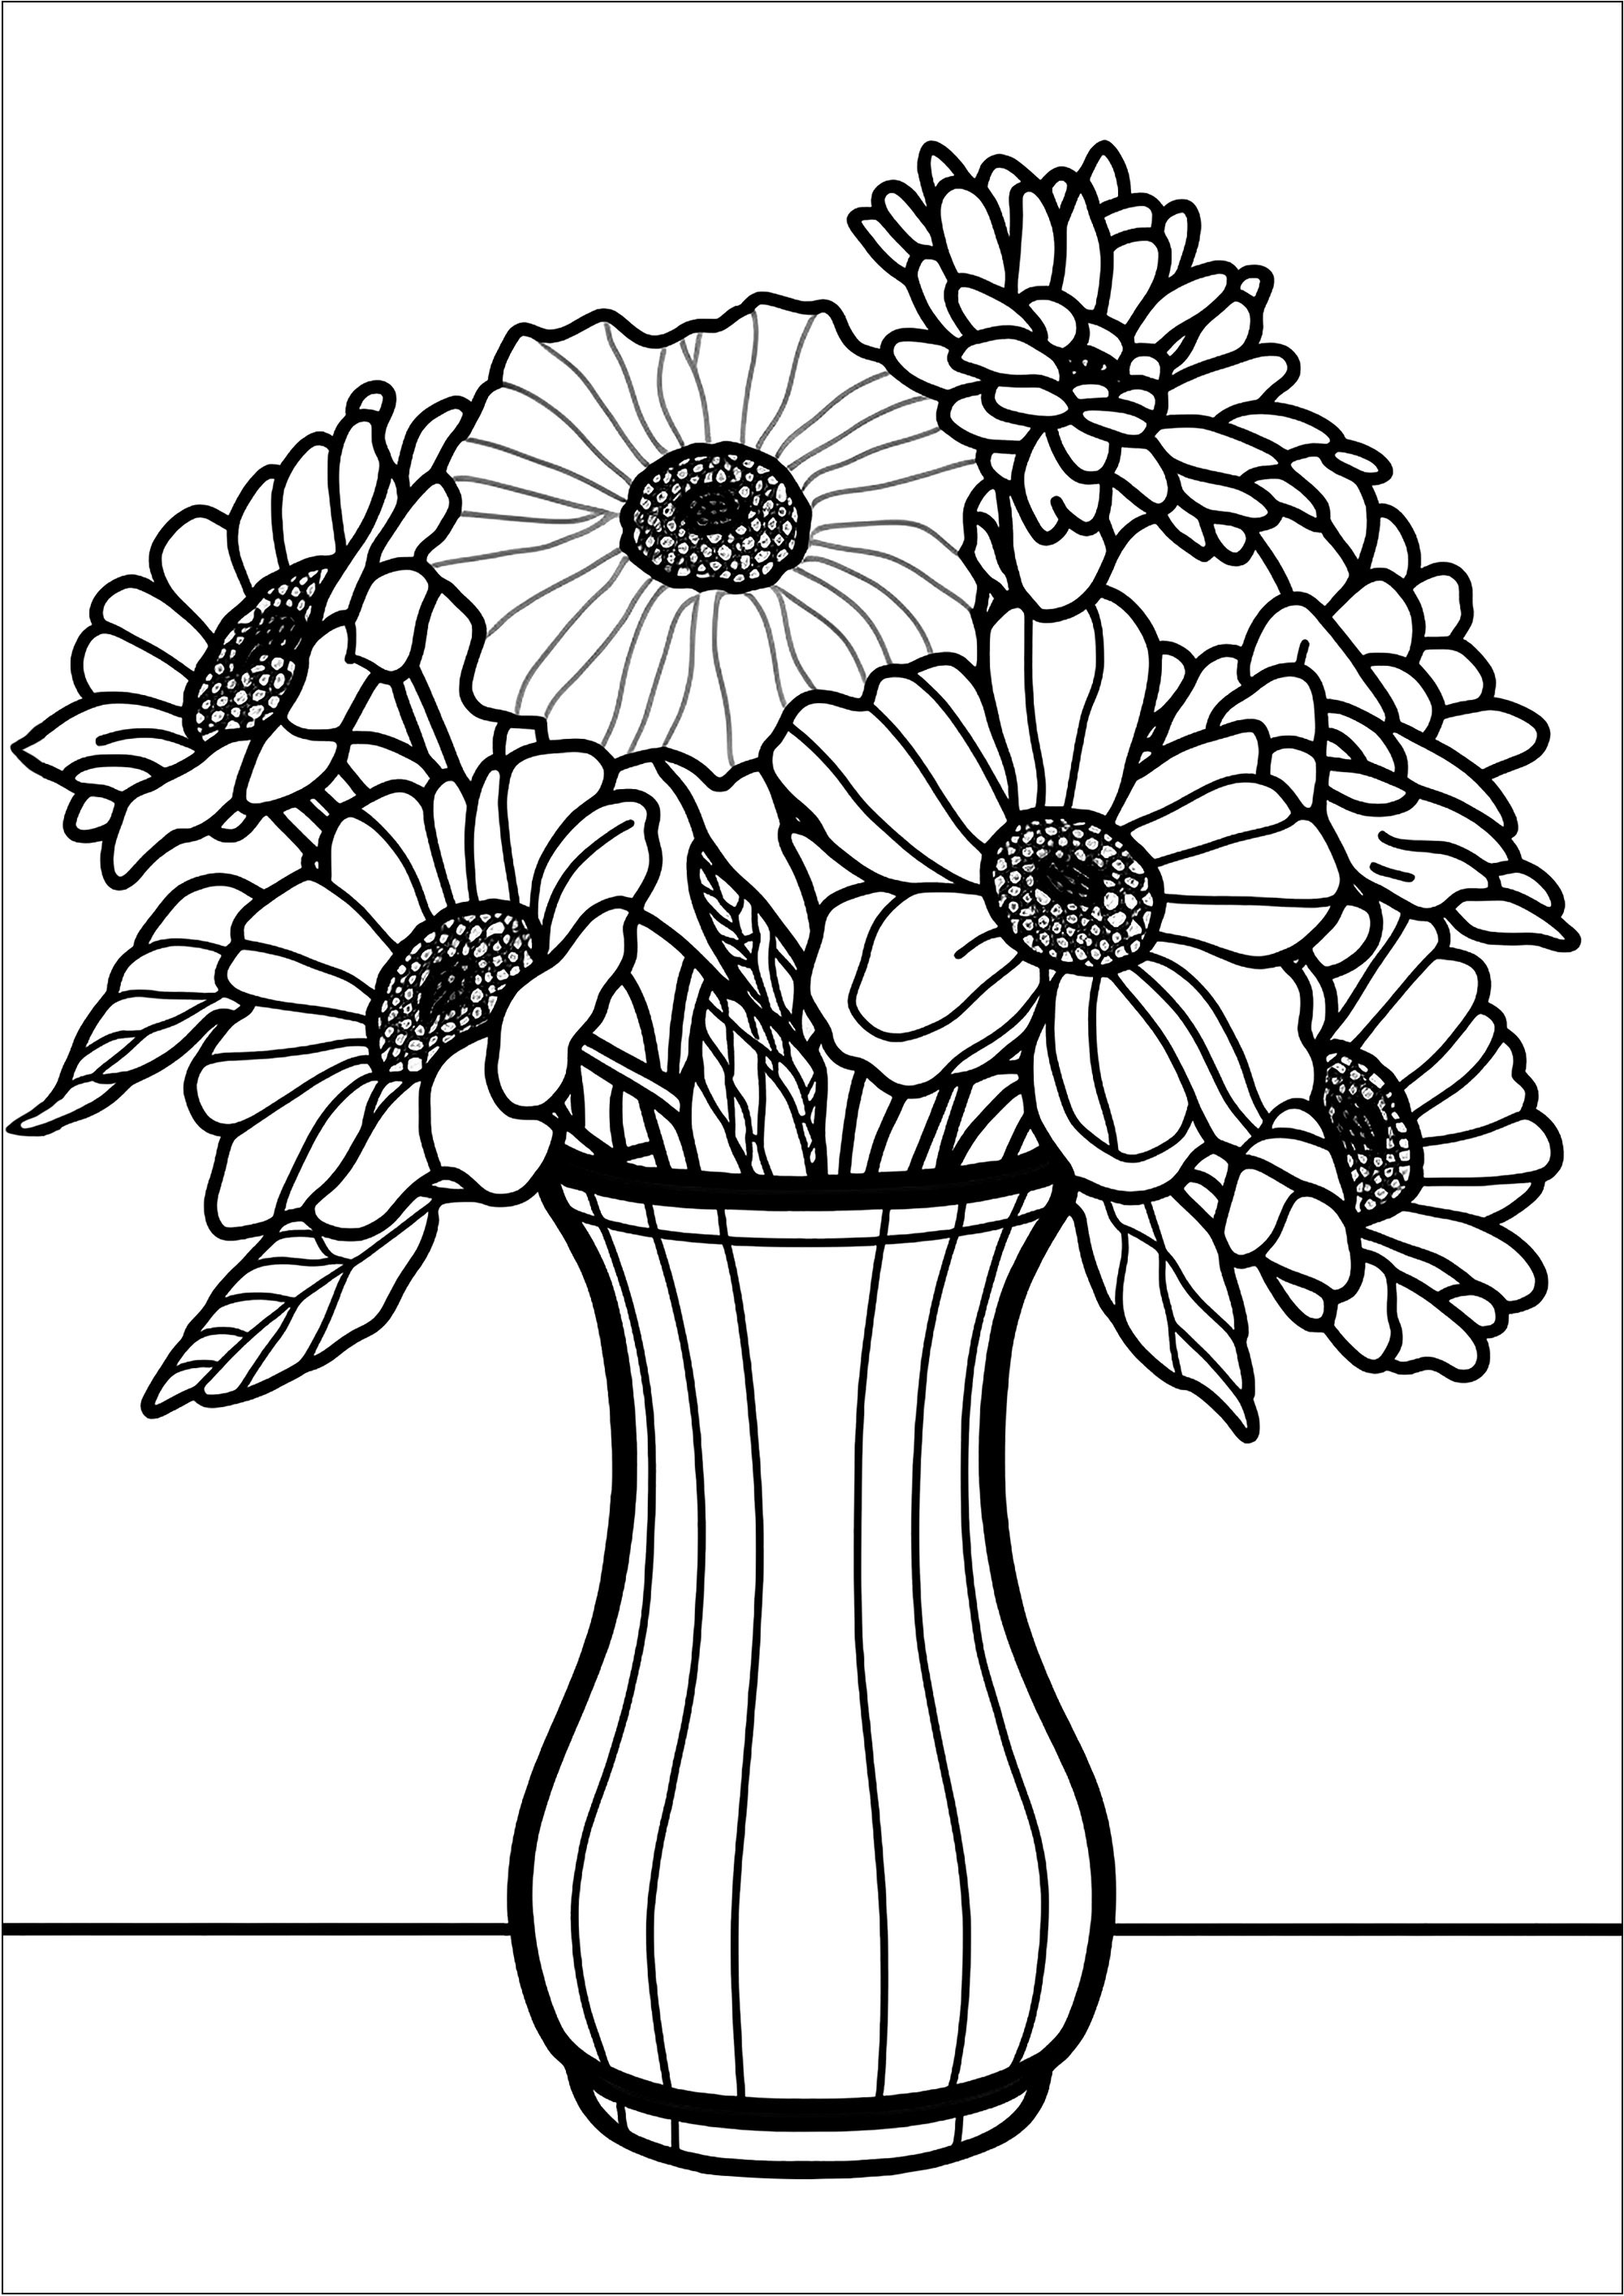 Flowers in a vase - Flowers Kids Coloring Pages